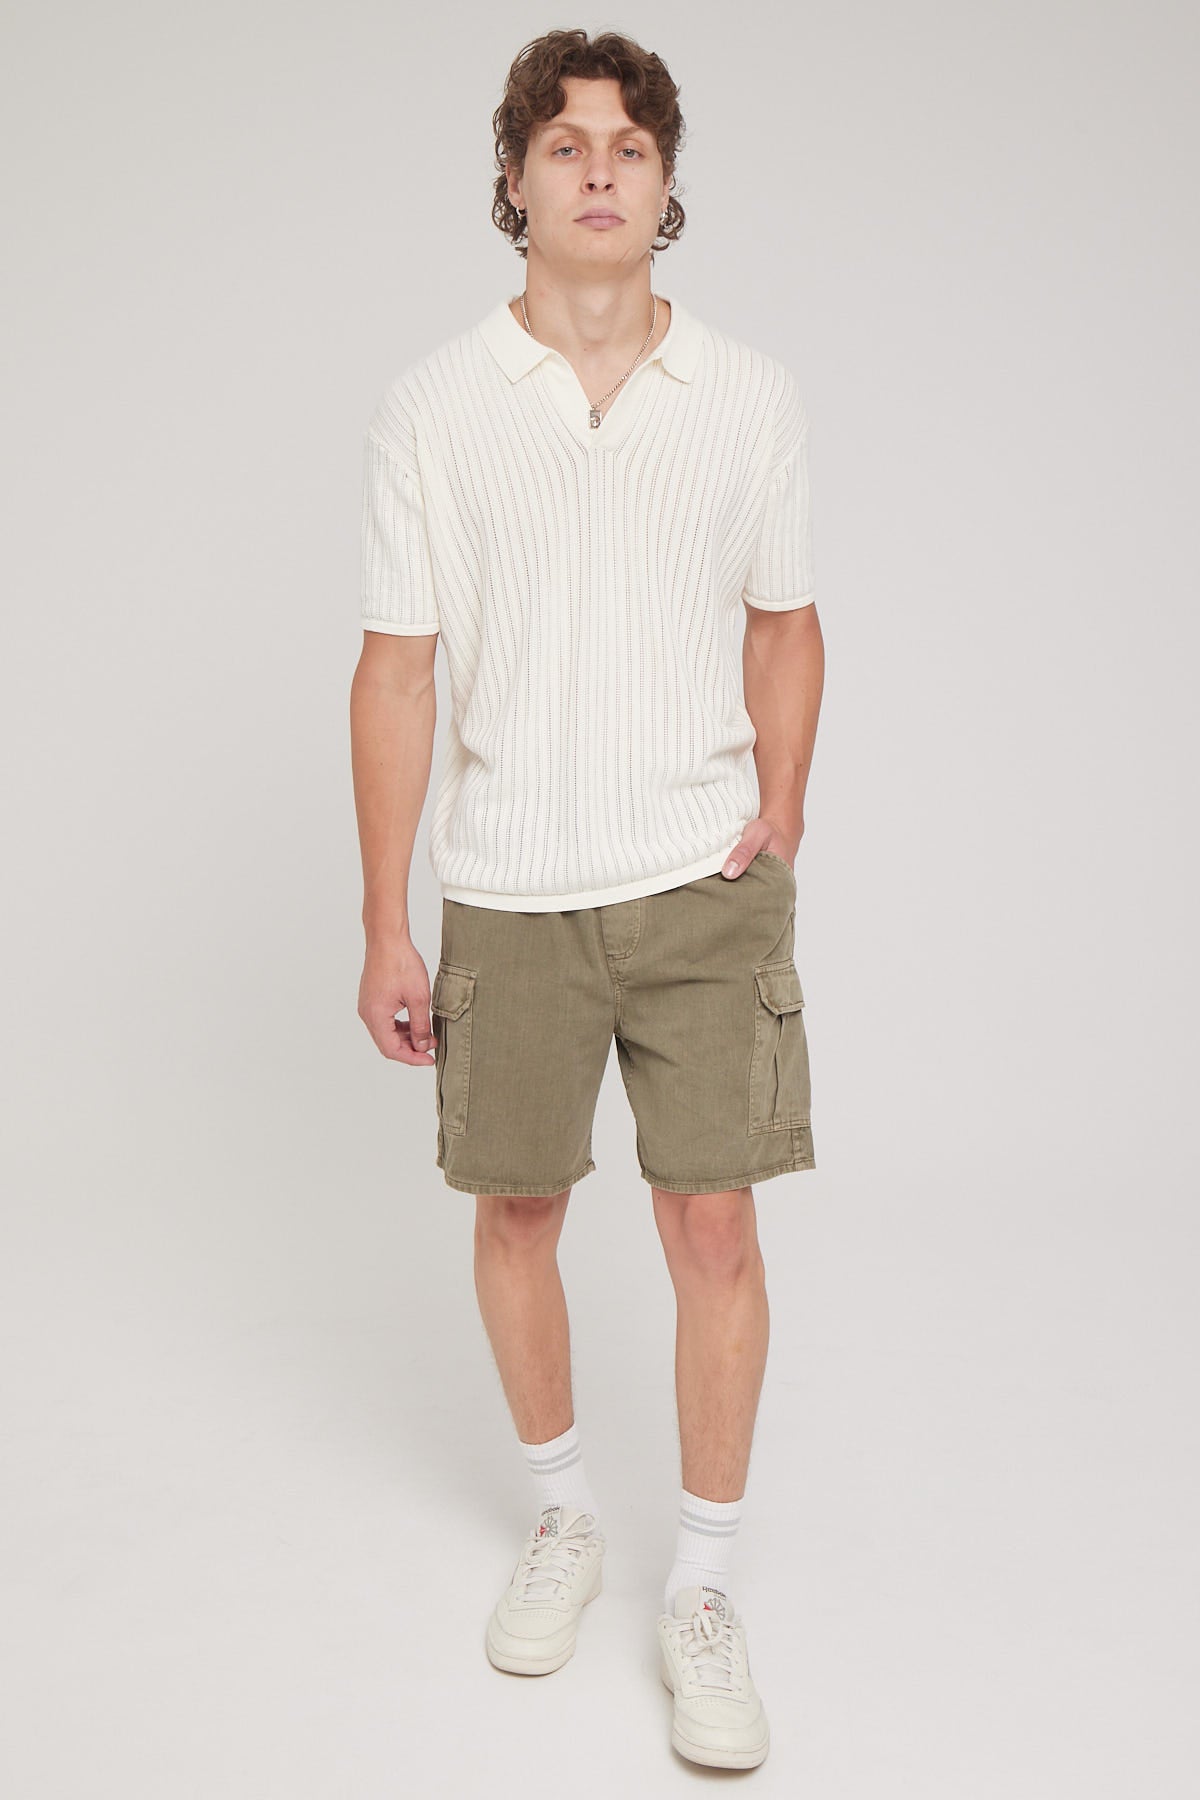 Rolla's Tradie Cargo Short Faded Army